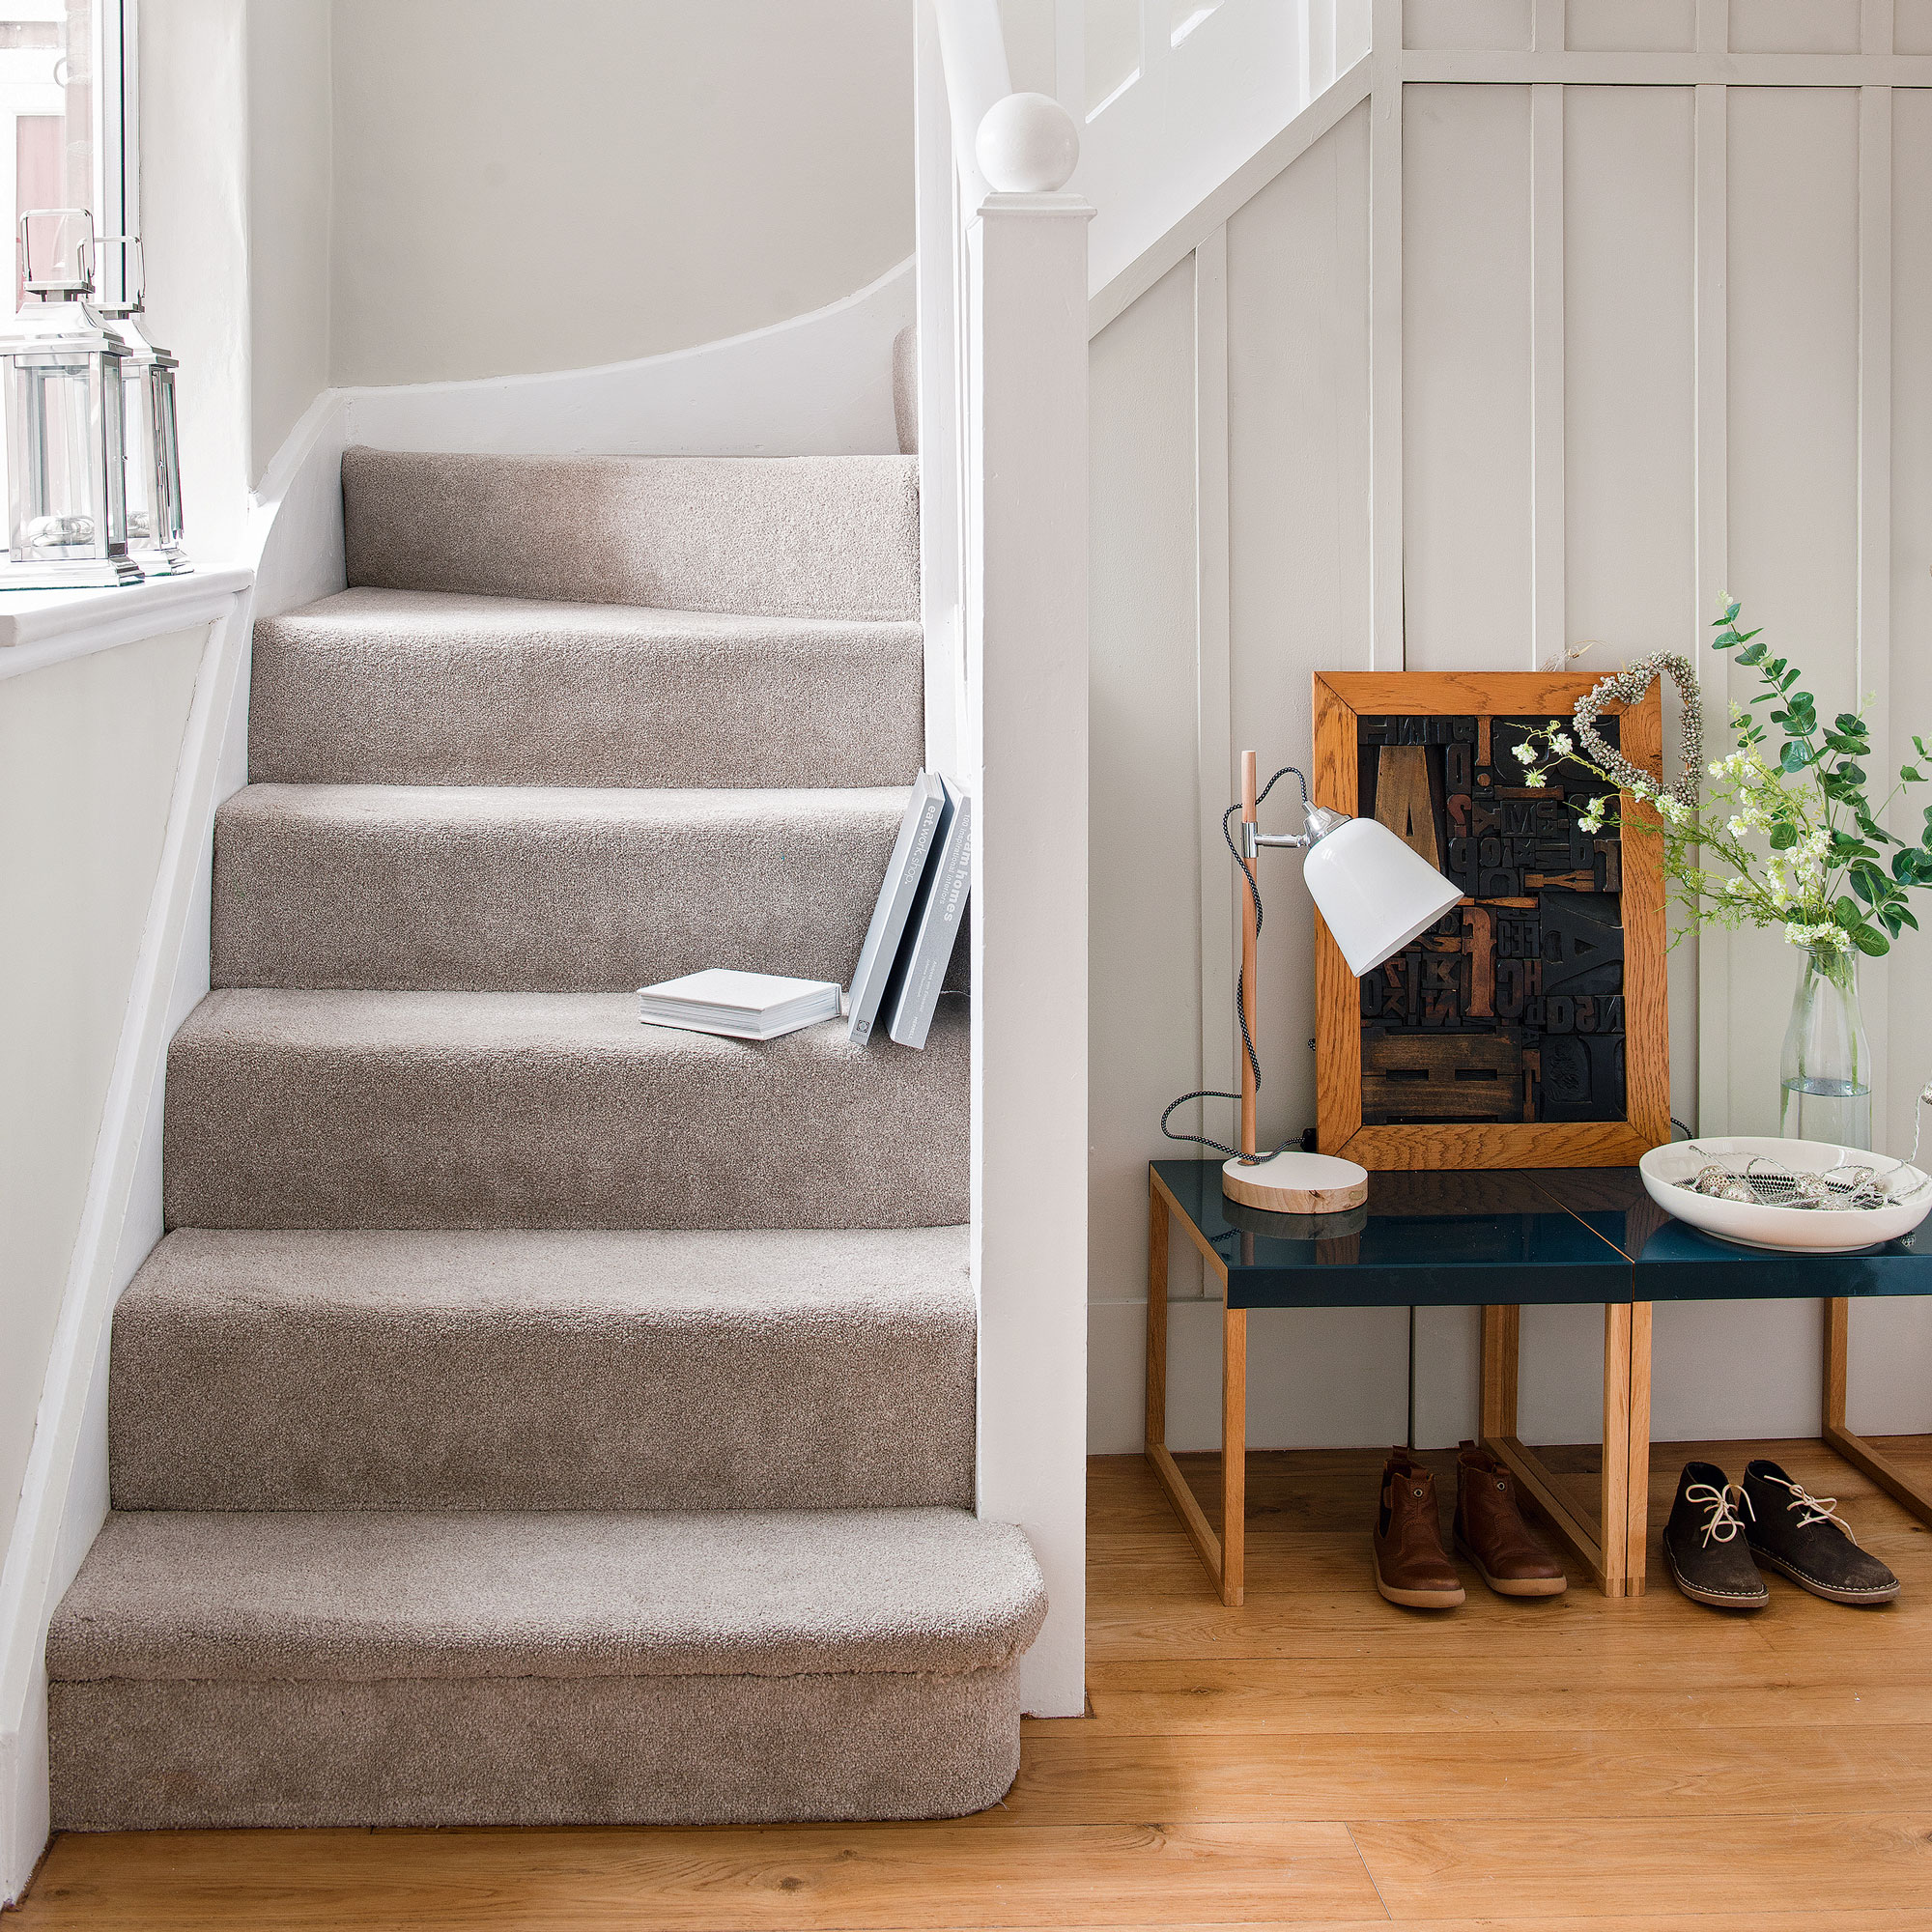 stair case with wooden floor and white wall